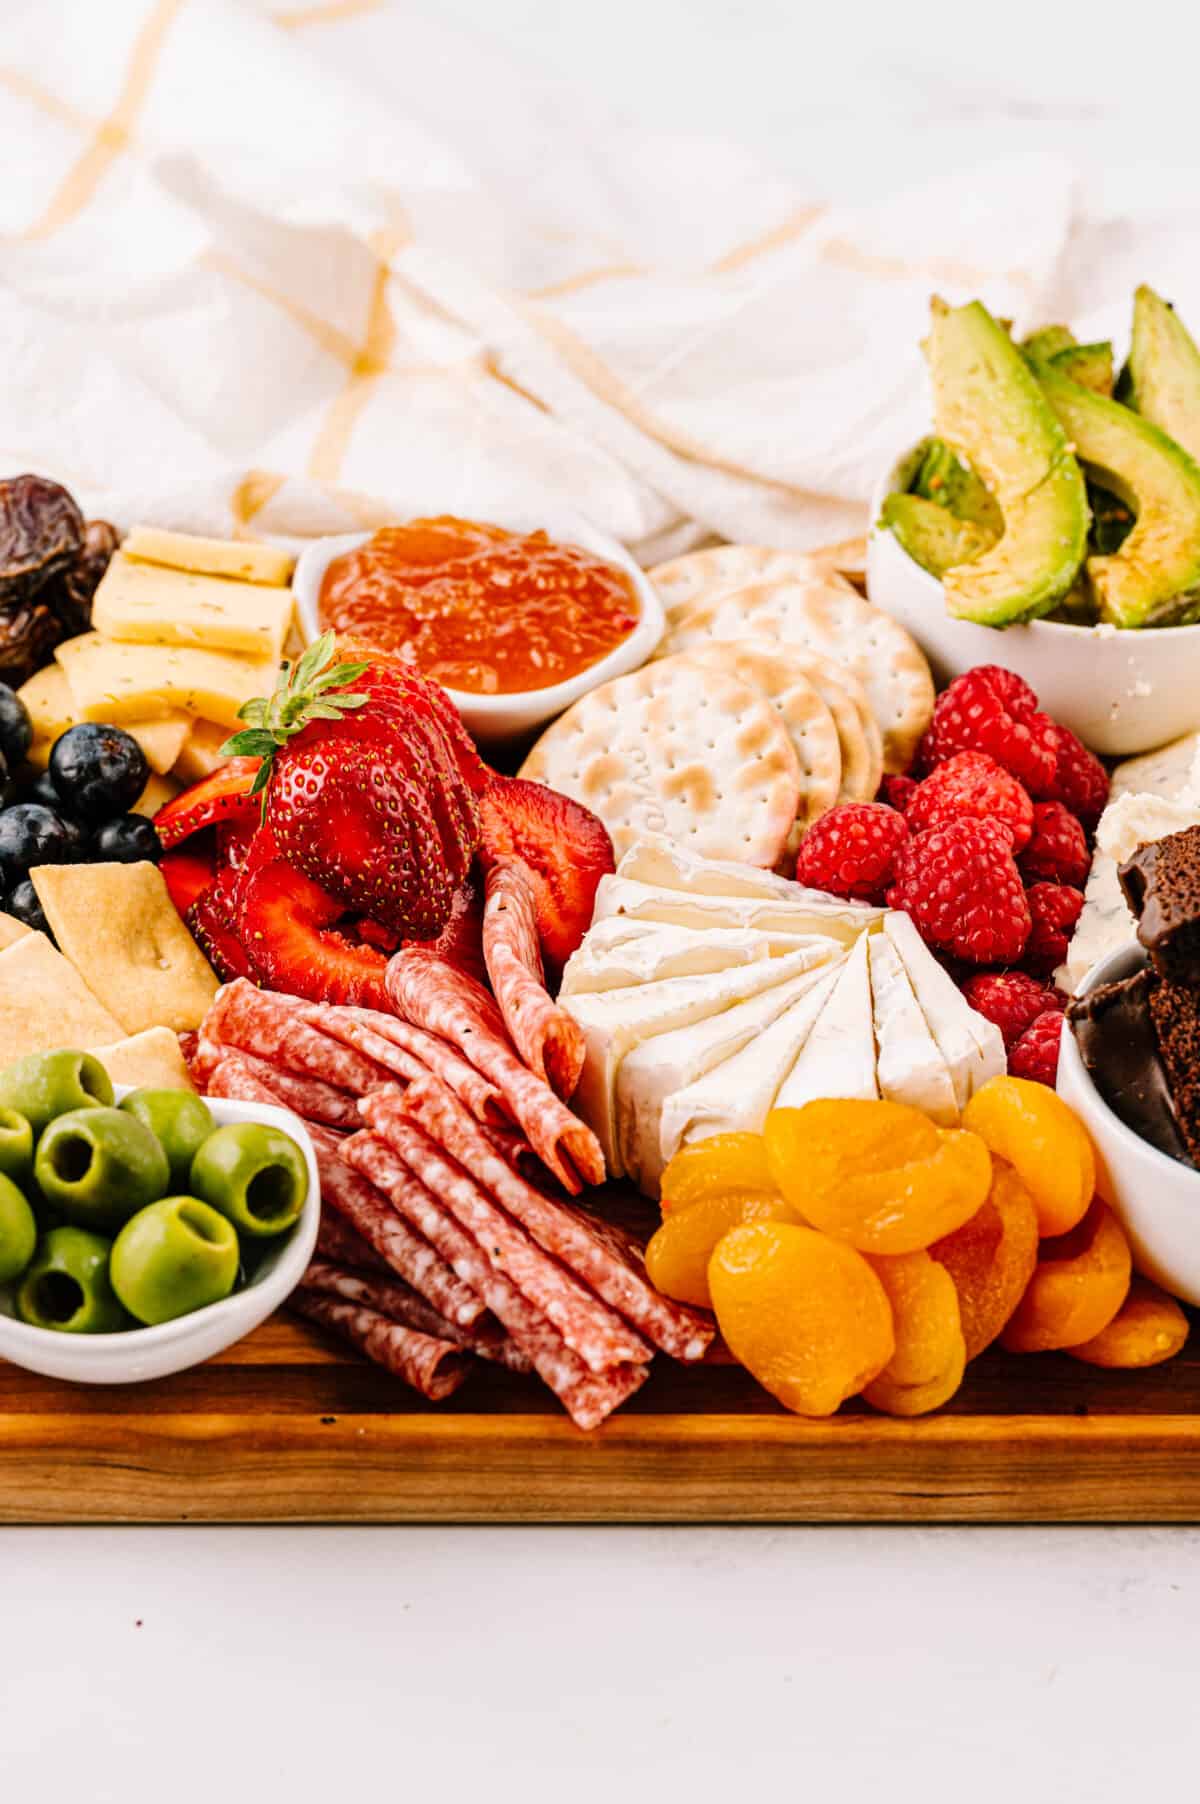 Assemble your charcuterie cheese board.